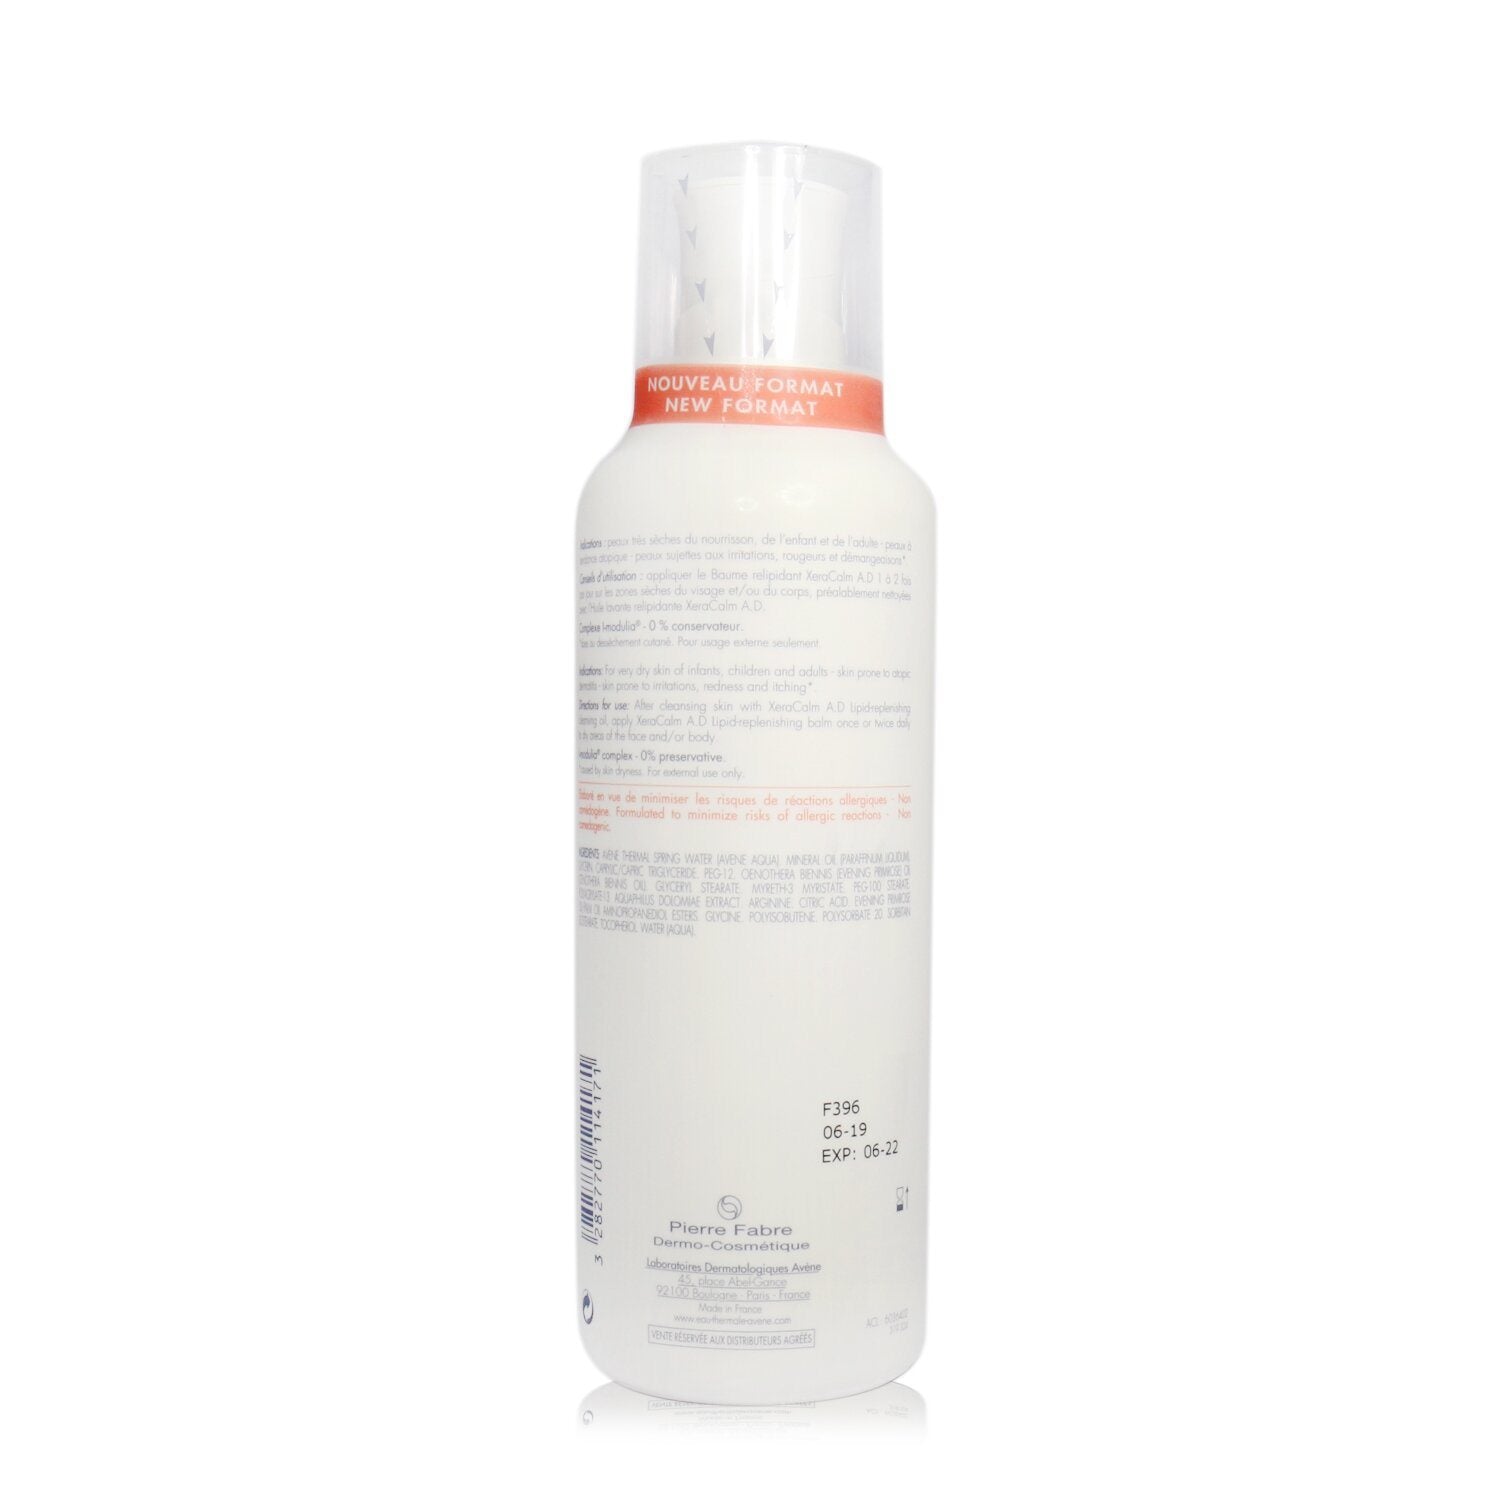 Avene moisturizing body lotion specifically for sensitive skin with atopic dermatitis, 200 ml.
XeraCalm A.D Lipid-Replenishing Balm - For Very Dry Skin Prone to Atopic Dermatitis or Itching.